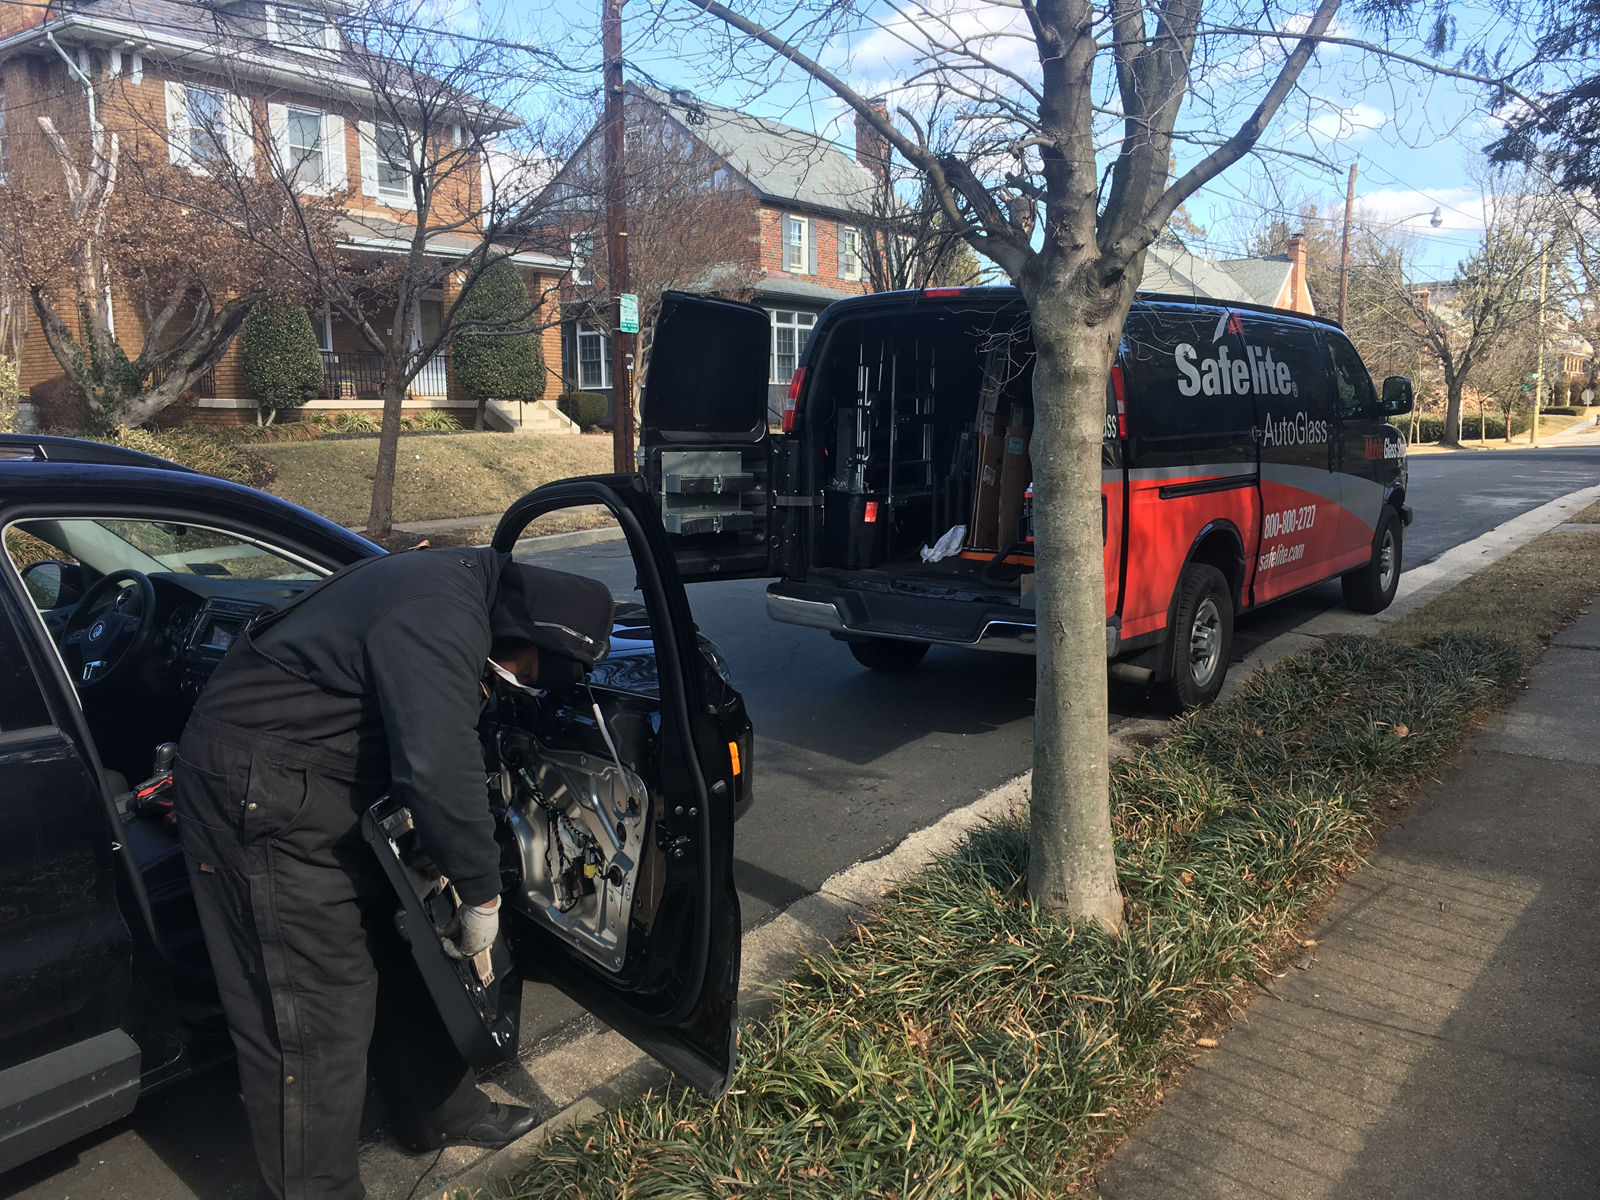 This car was one of 47 cars that were broken in to in the Sheppard Park neighborhood sometime on Wednesday night or early Thursday morning according to D.C. Police. (WTOP/Mike Murillo)